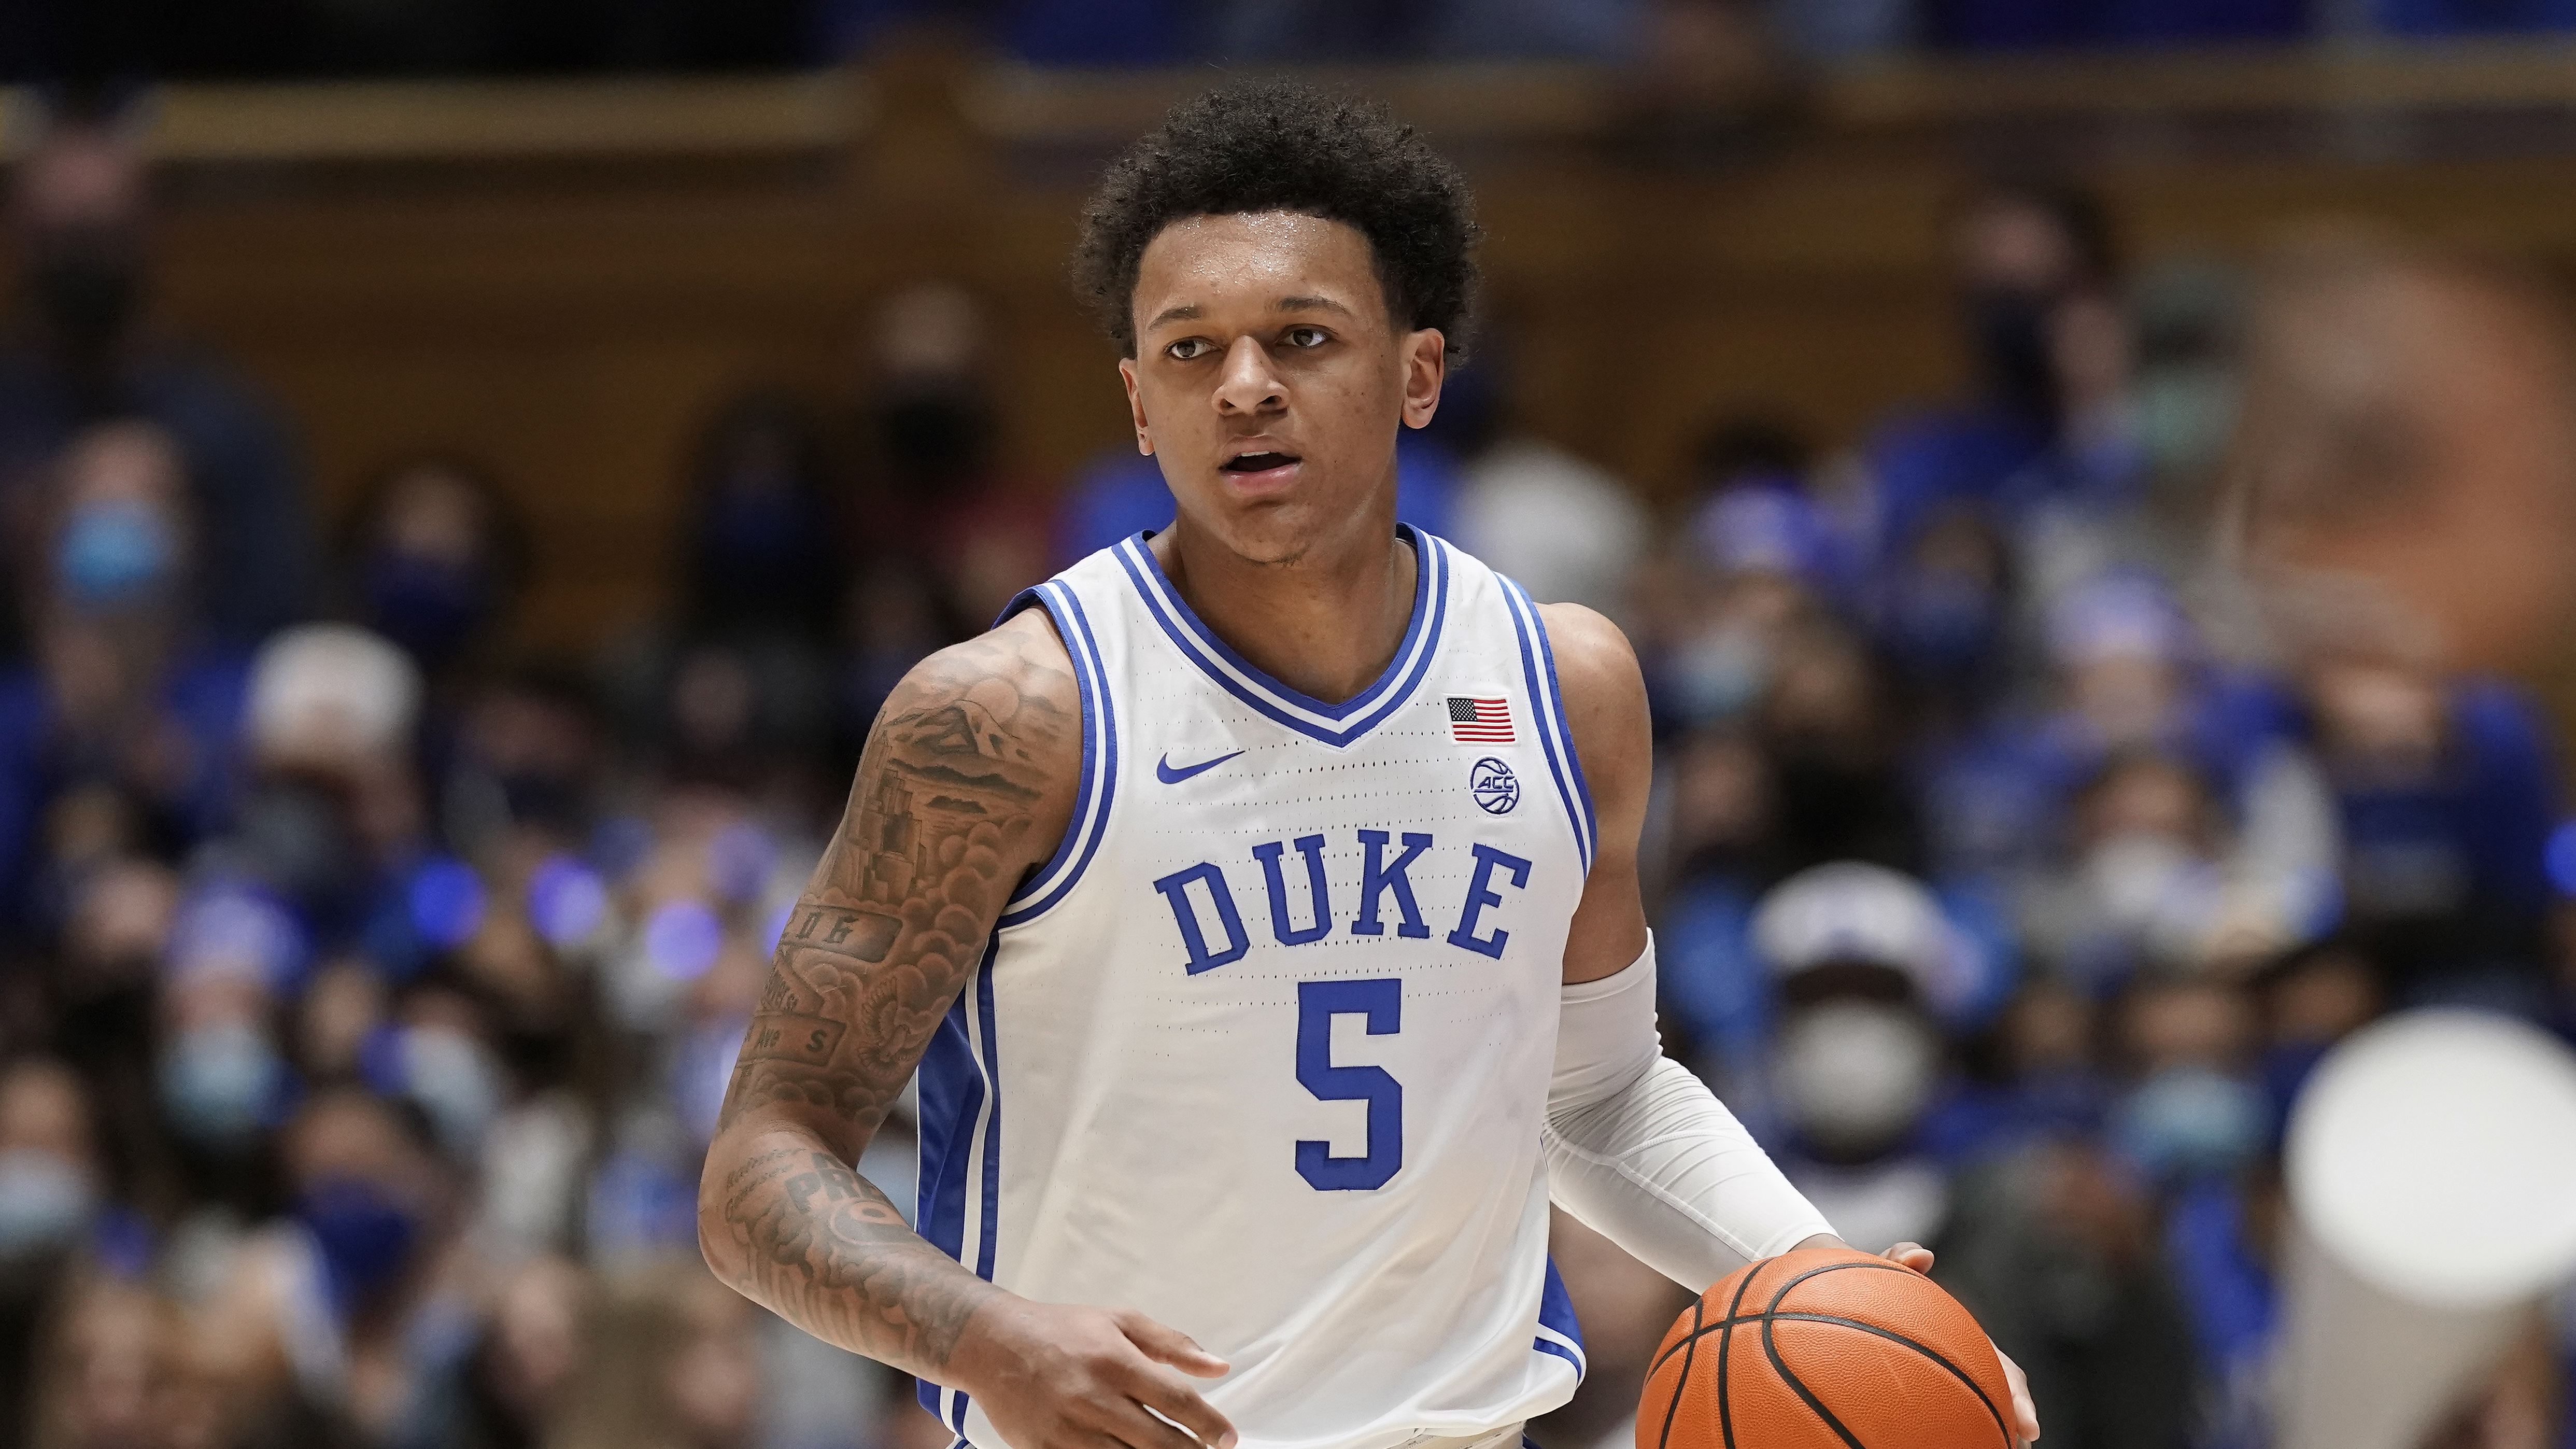 Duke's Paolo Banchero to appear in NBA 2K22 - Sports Illustrated